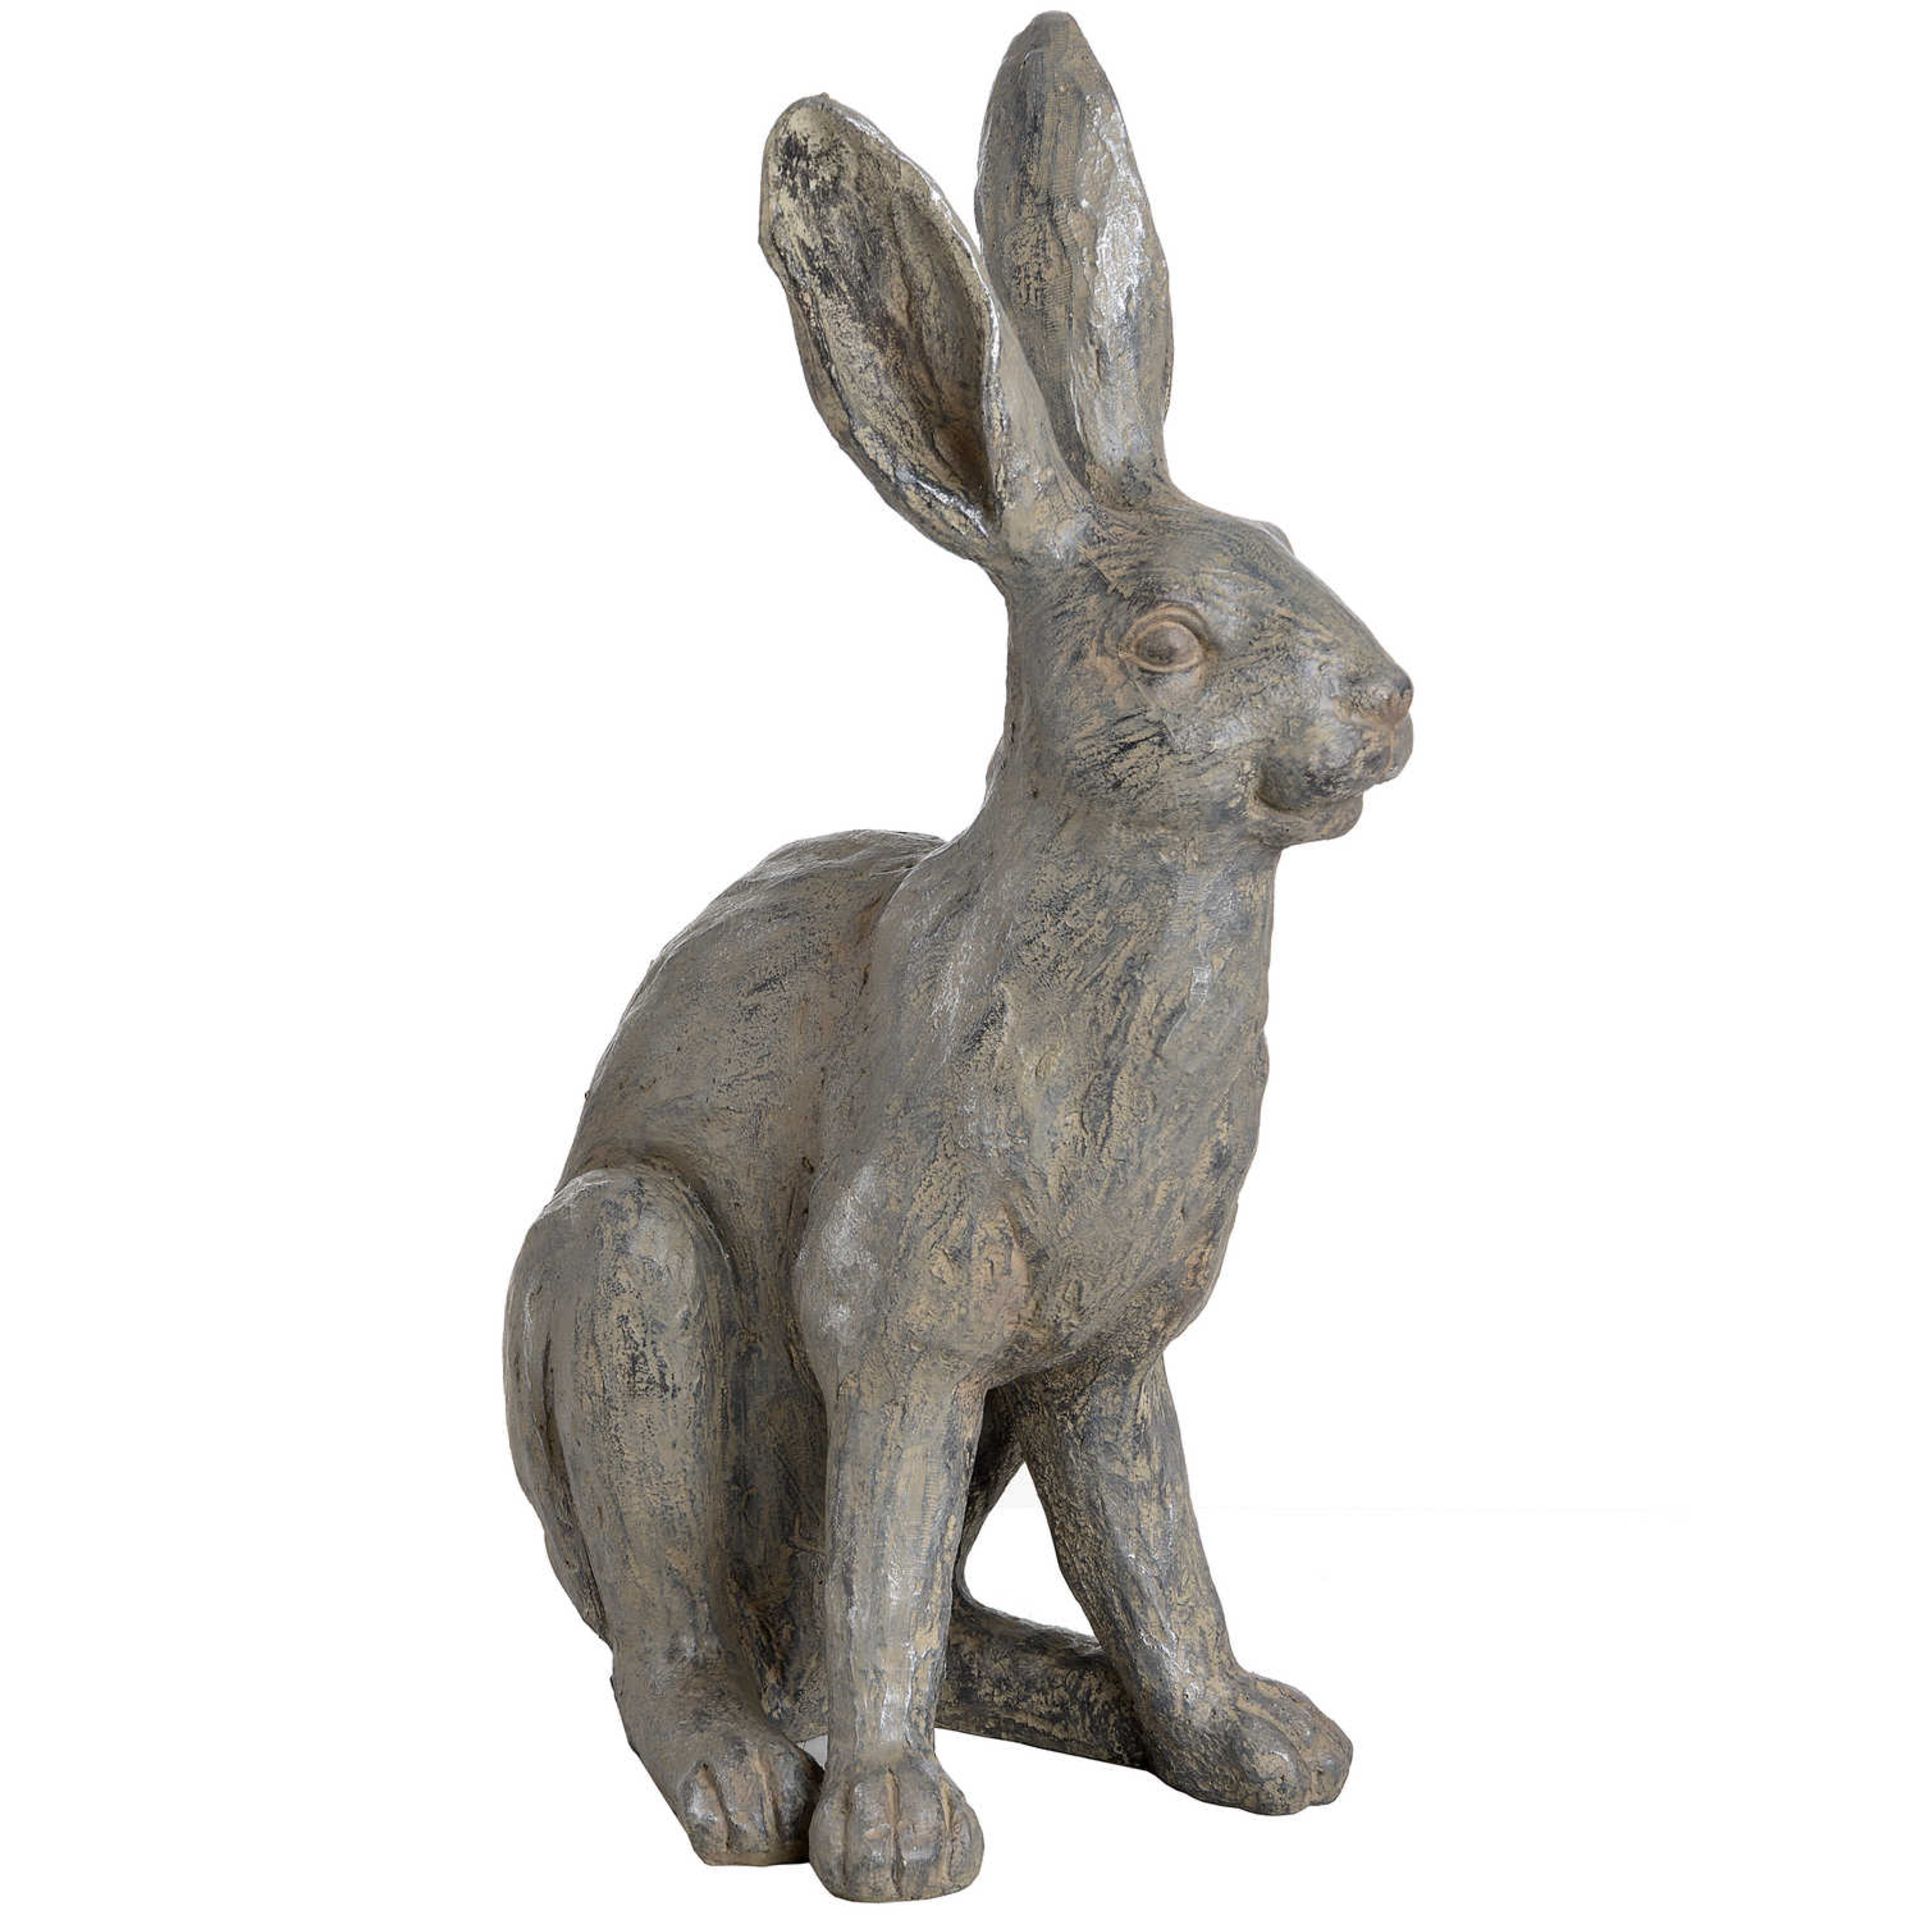 Large Metallic Hare Statue The hare statue adds a playful character into any home, it is a unique